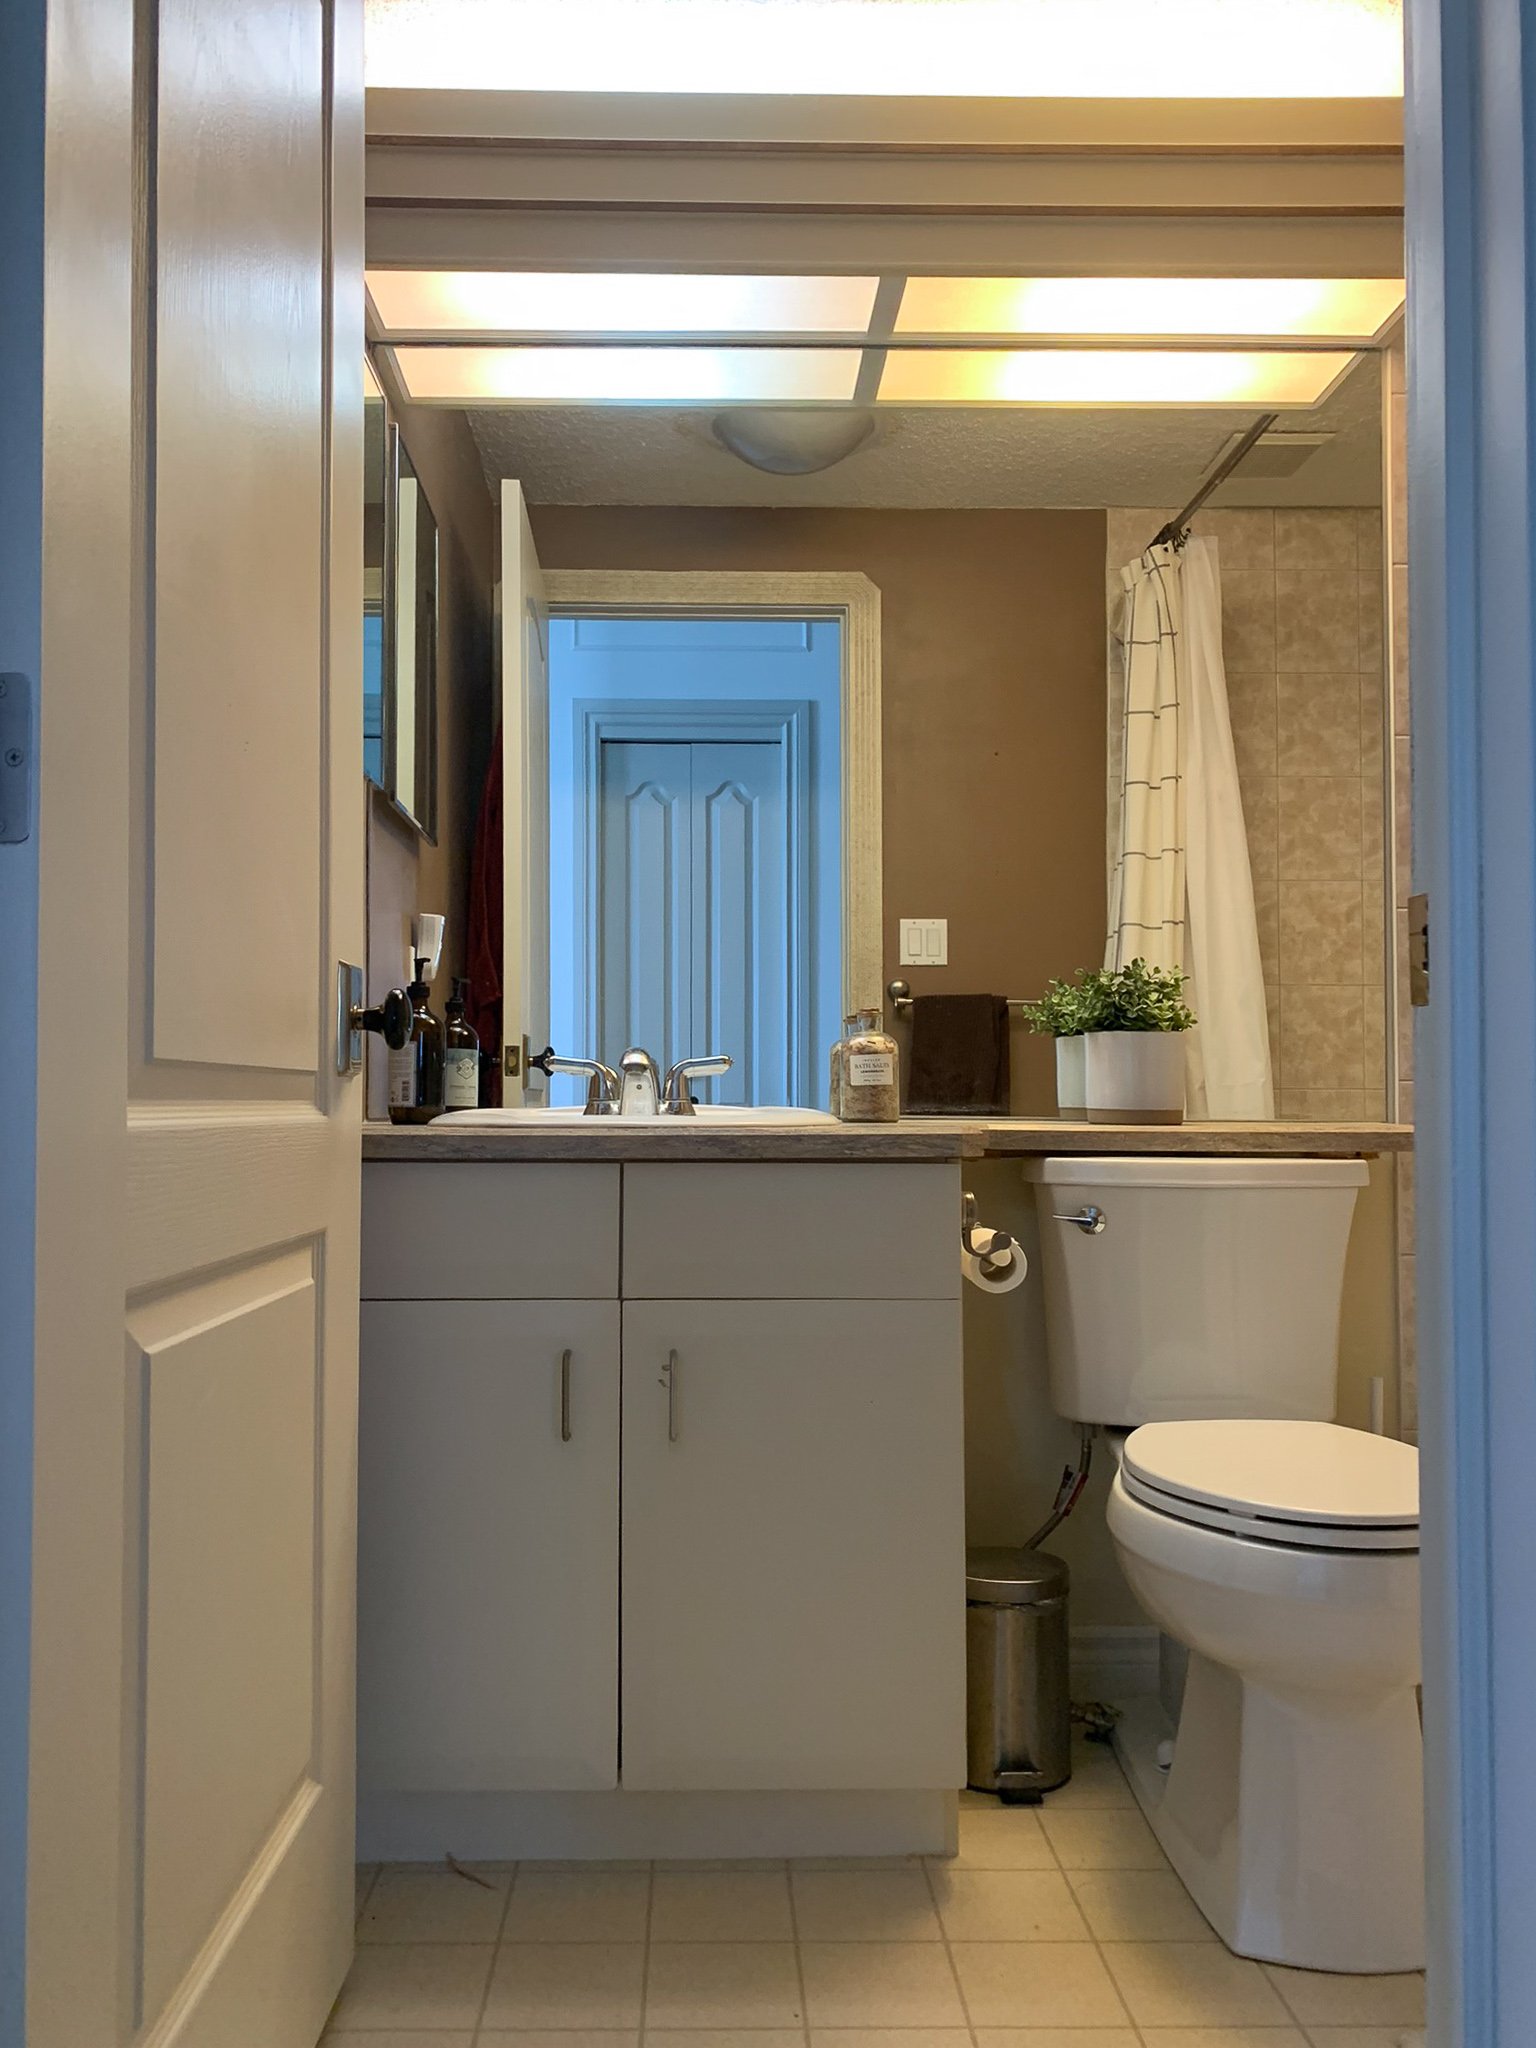 Bathroom before with flourescent light, frameless mirror, flat front white cabients, laminate counters and linoleum floor